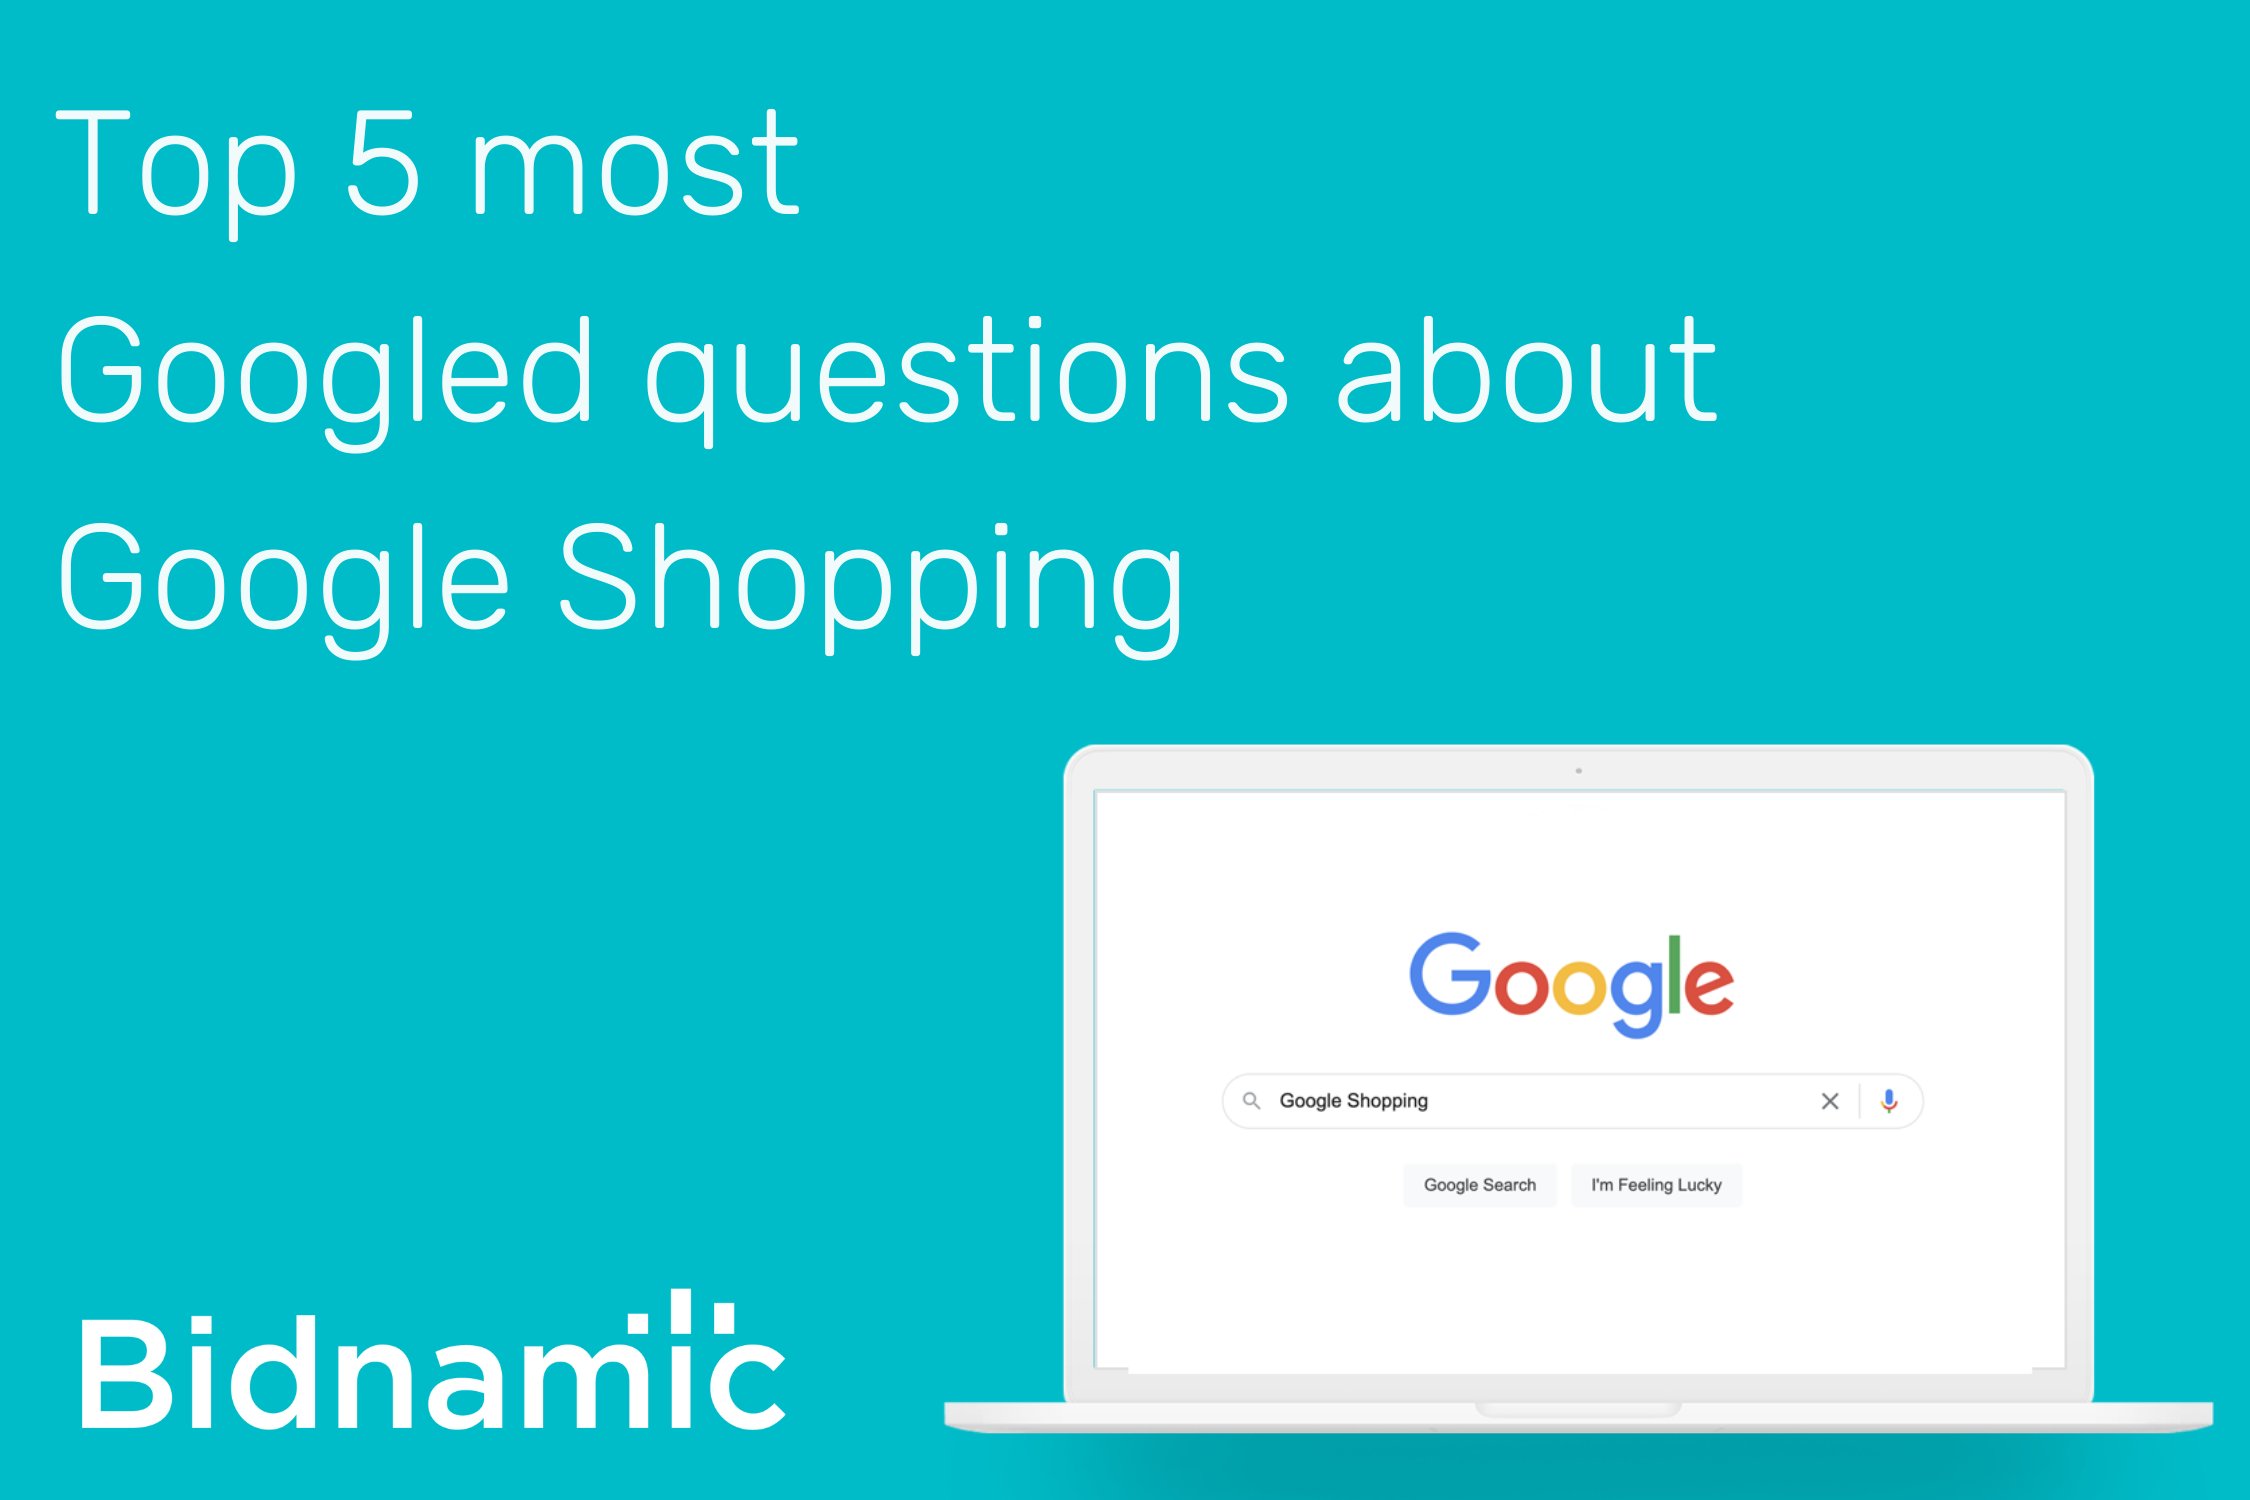 The top 5 most Googled questions about Google Shopping